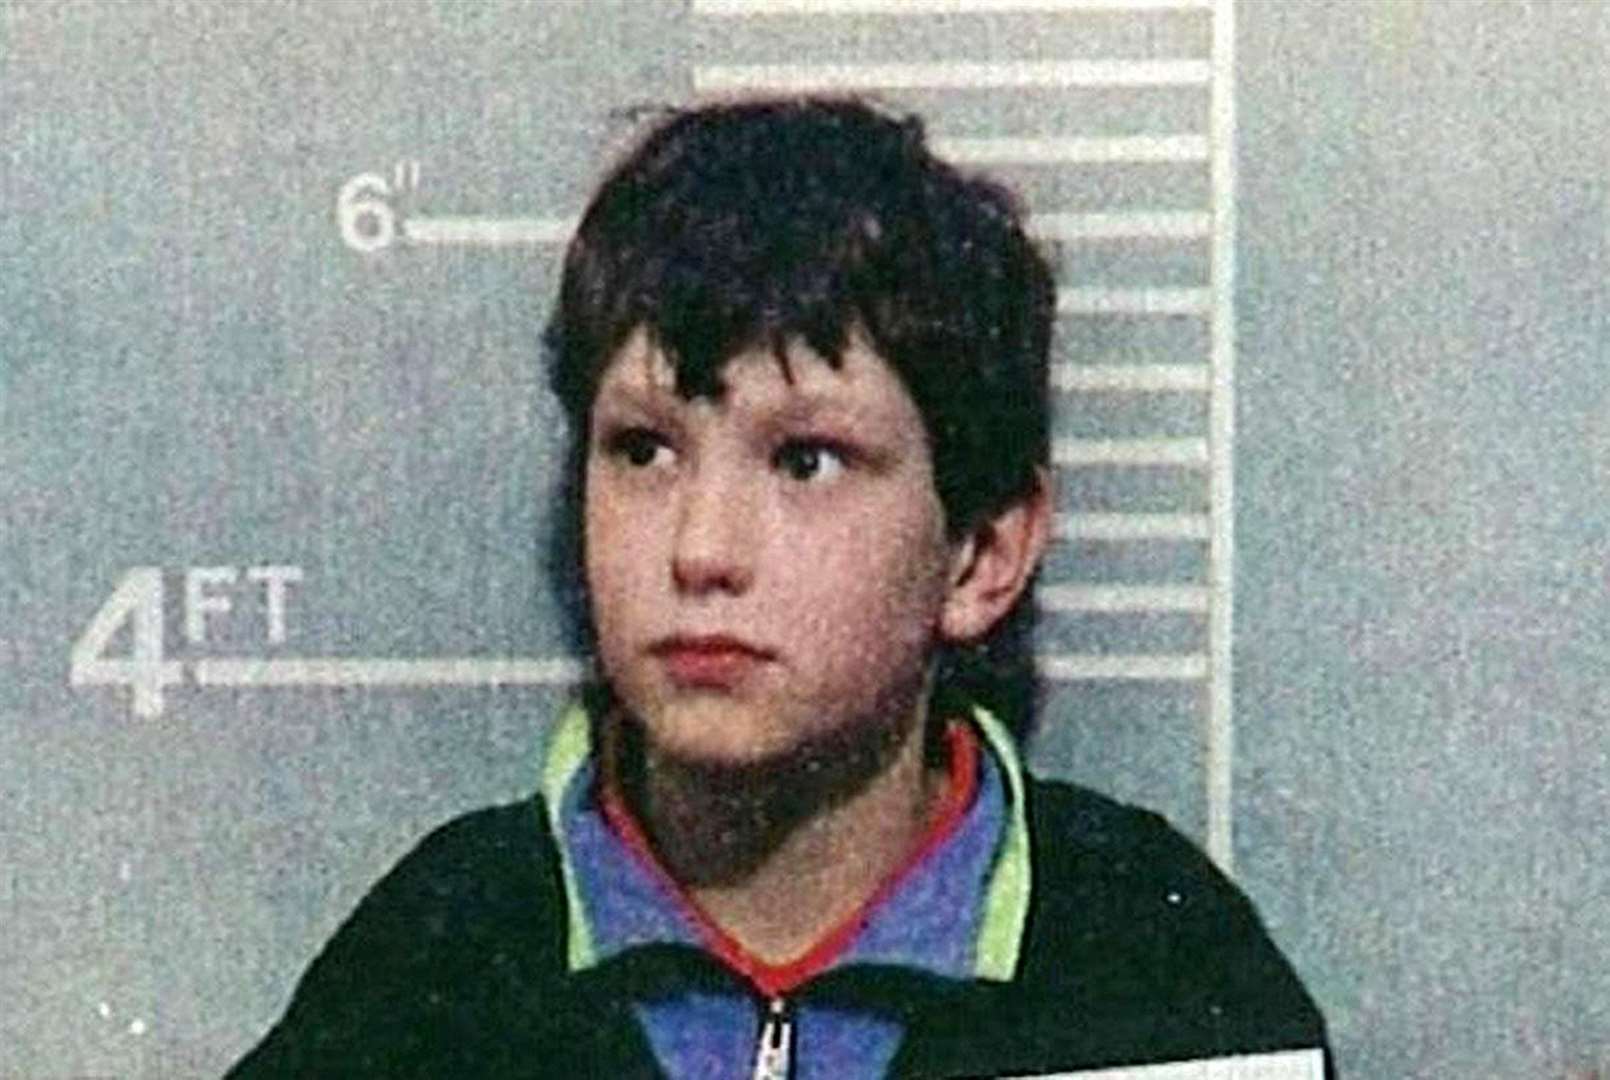 Jon Venables and Robert Thompson were both 10 when they kidnapped, tortured and murdered two-year-old James in Liverpool in February 1993 (PA)